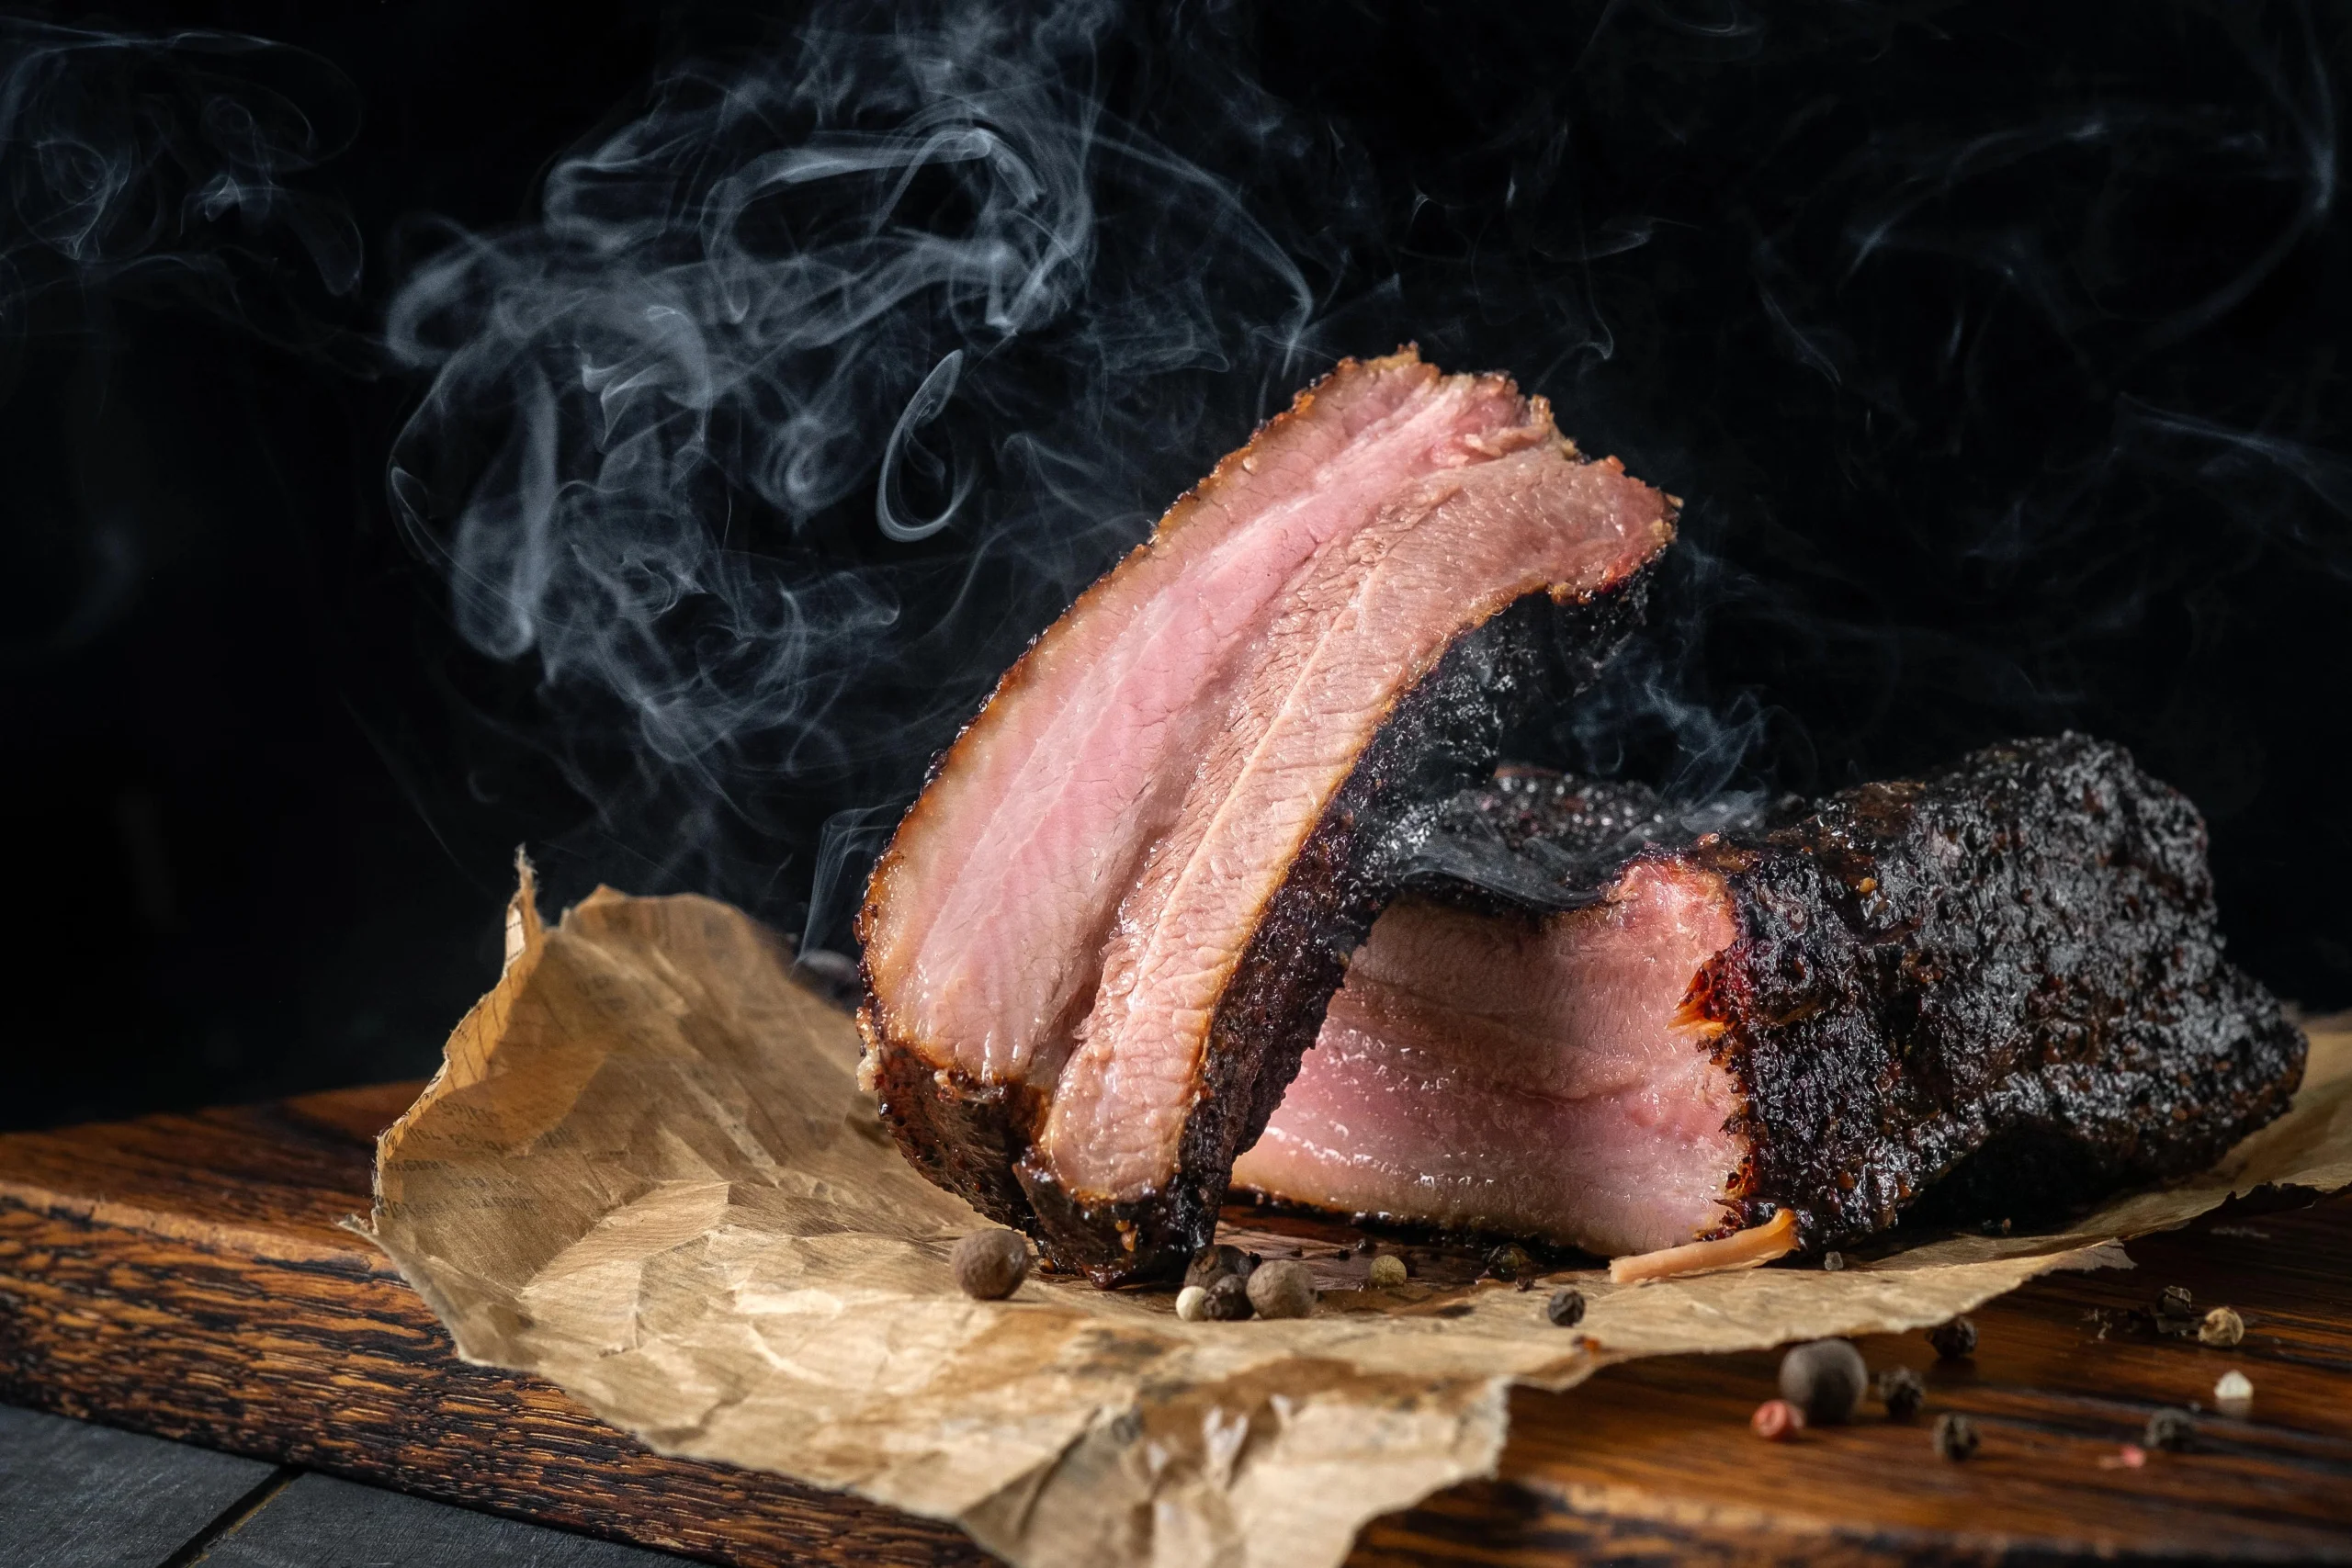 bradley smoked brisket recipes - How long does it take to cook a brisket in a Bradley Smoker